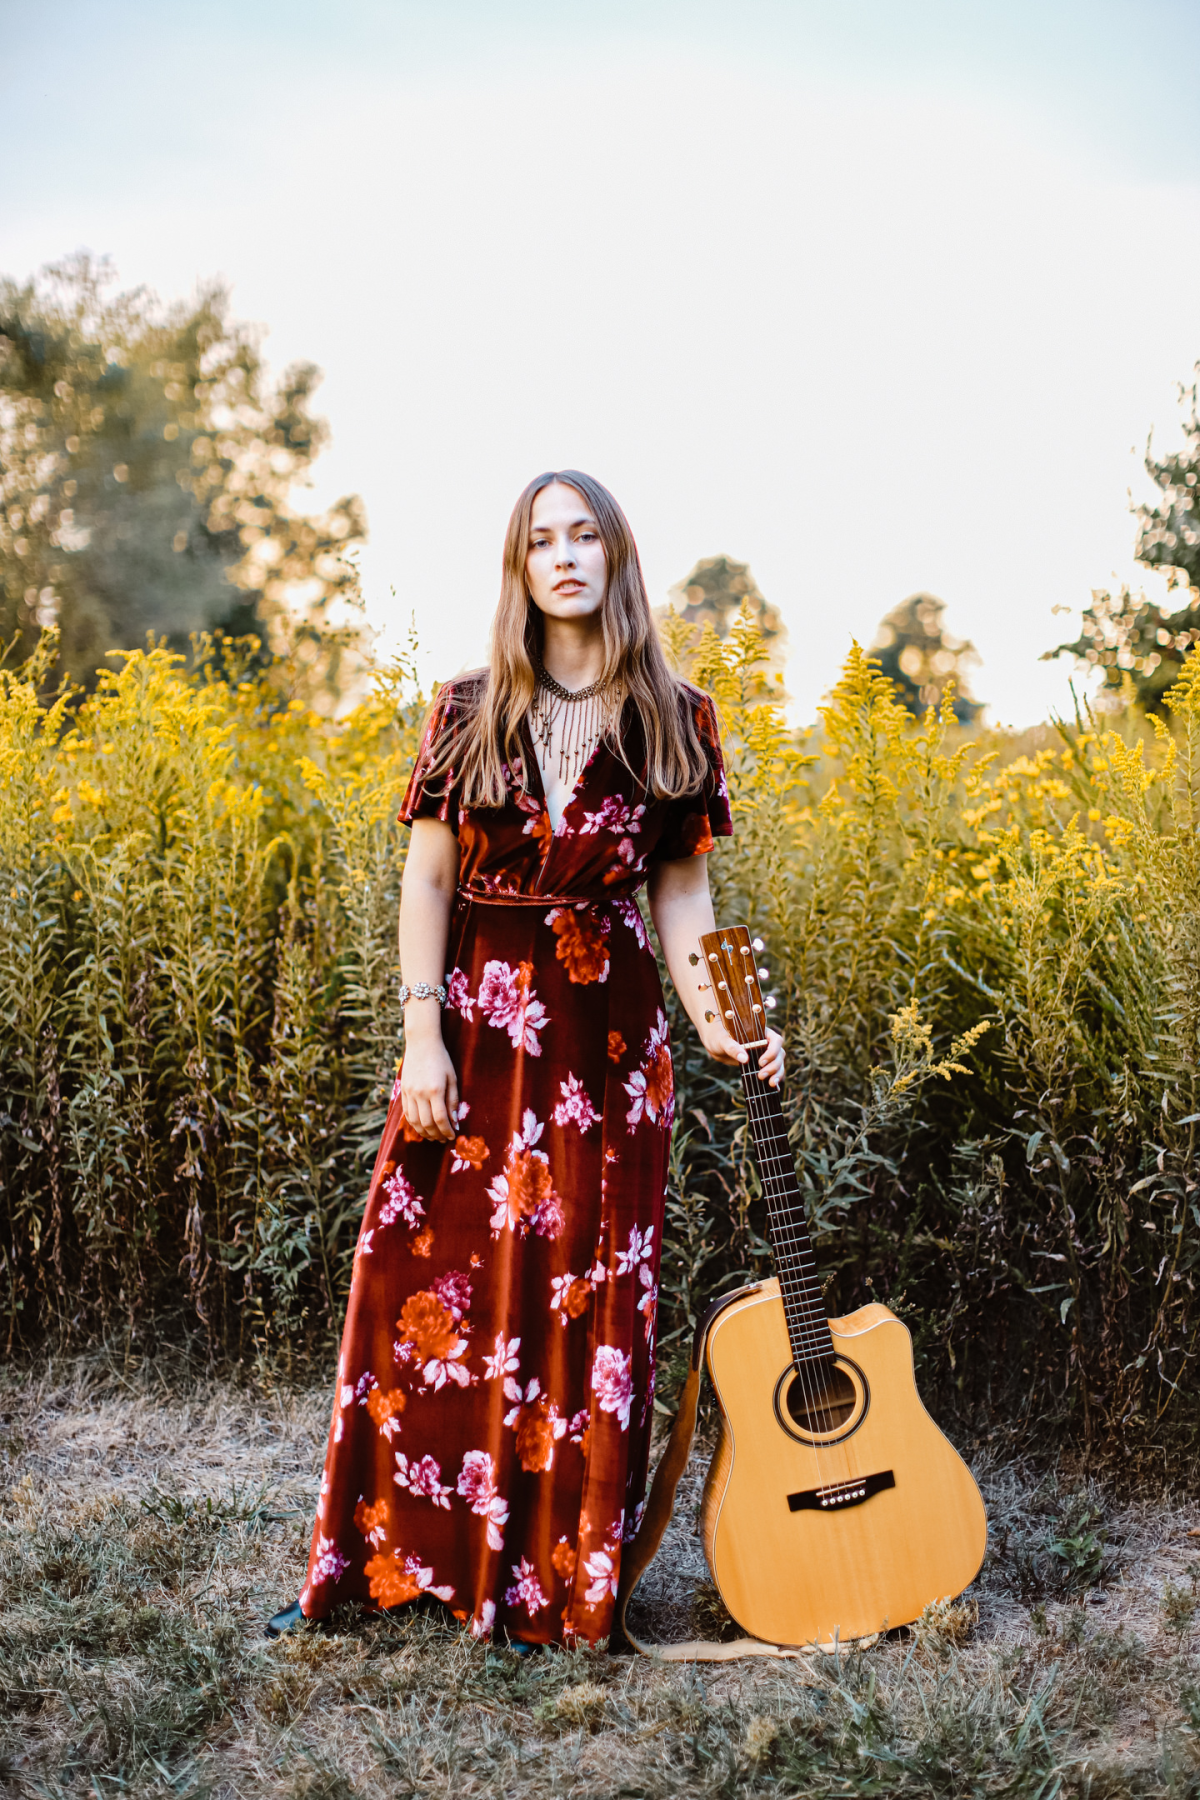 Maddi Mae stands in front of a field of grass wearing a red dress and holding a guitar.